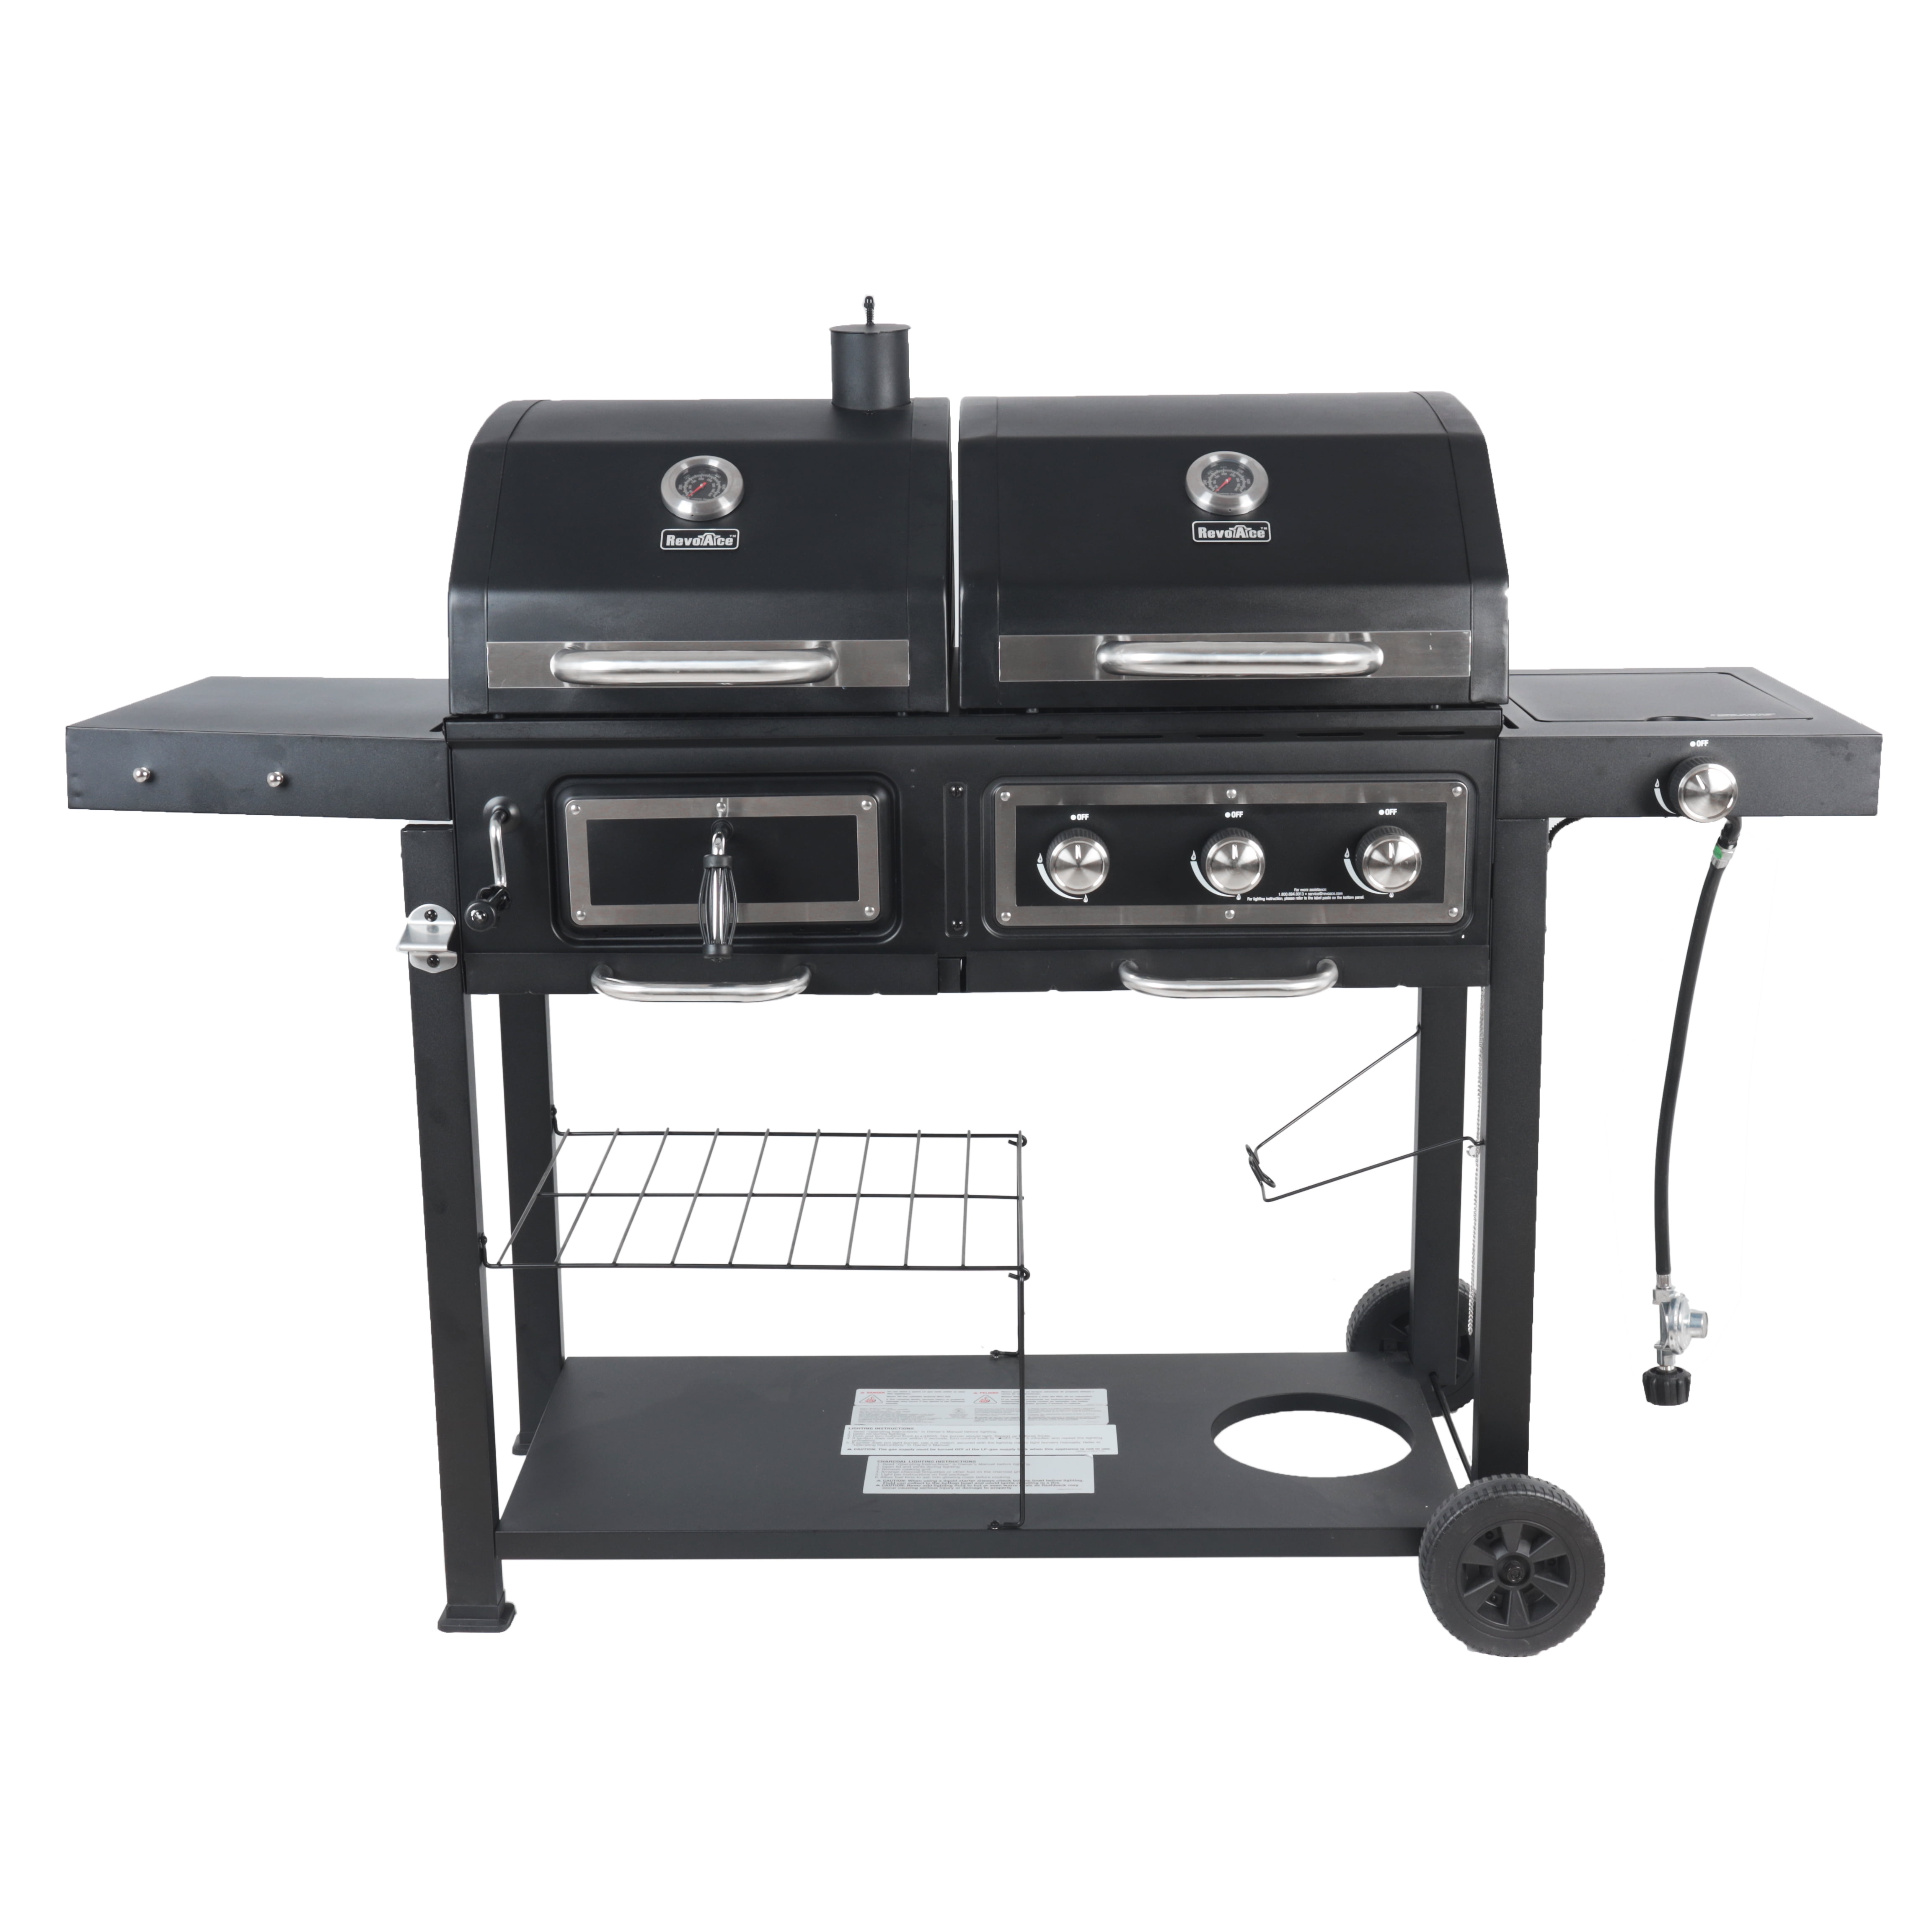 1554 for sale online Blackstone Duo Griddle and Charcoal Grill Combo 